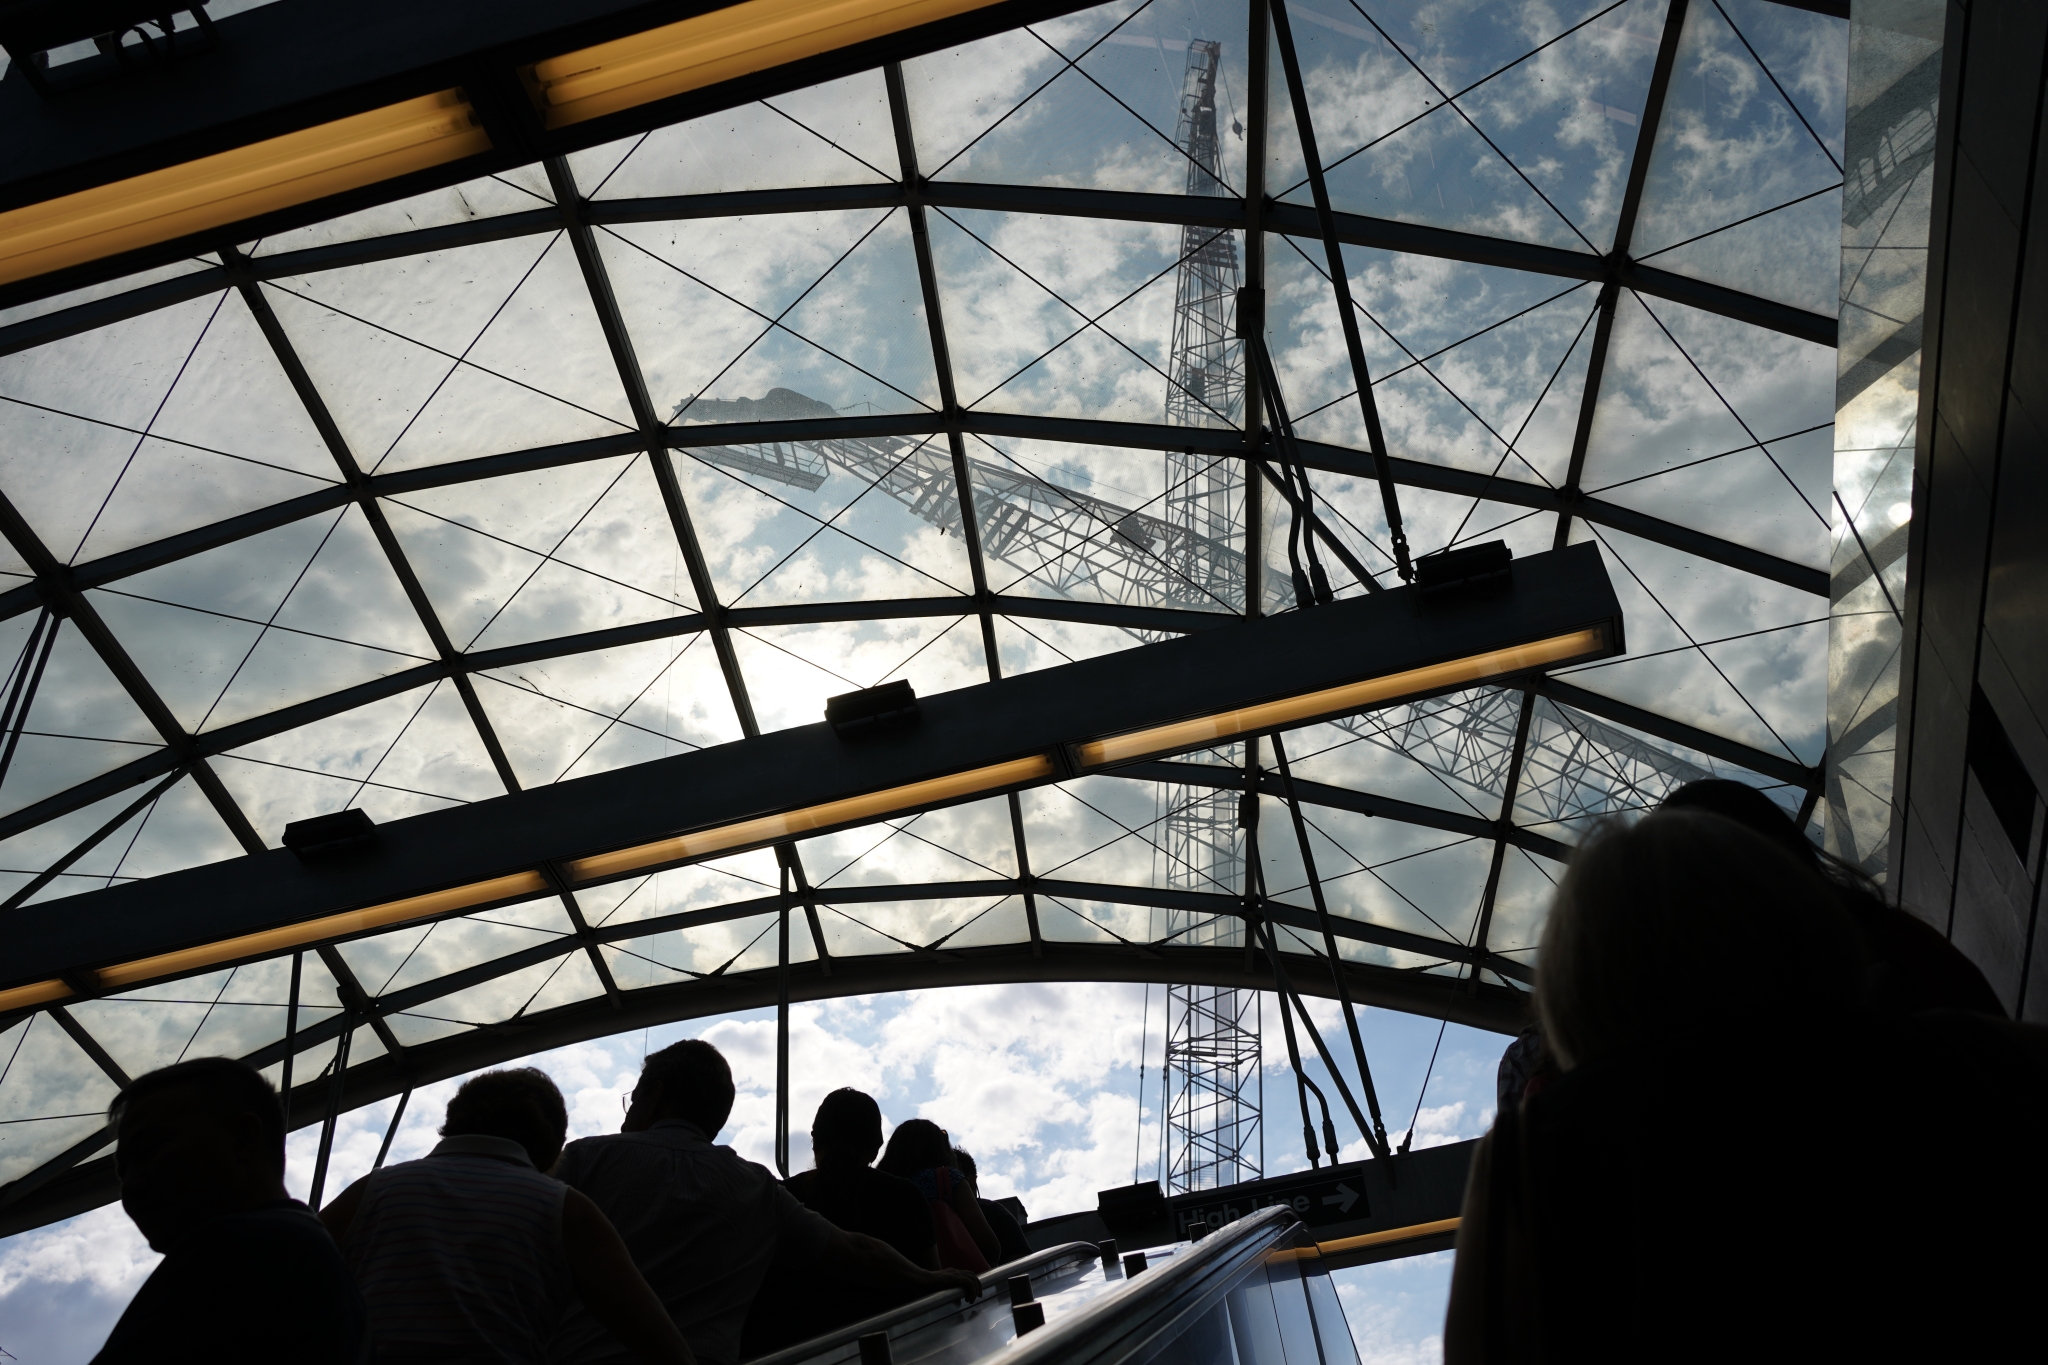 A large curved glass roof over silhouetted people riding an escalator